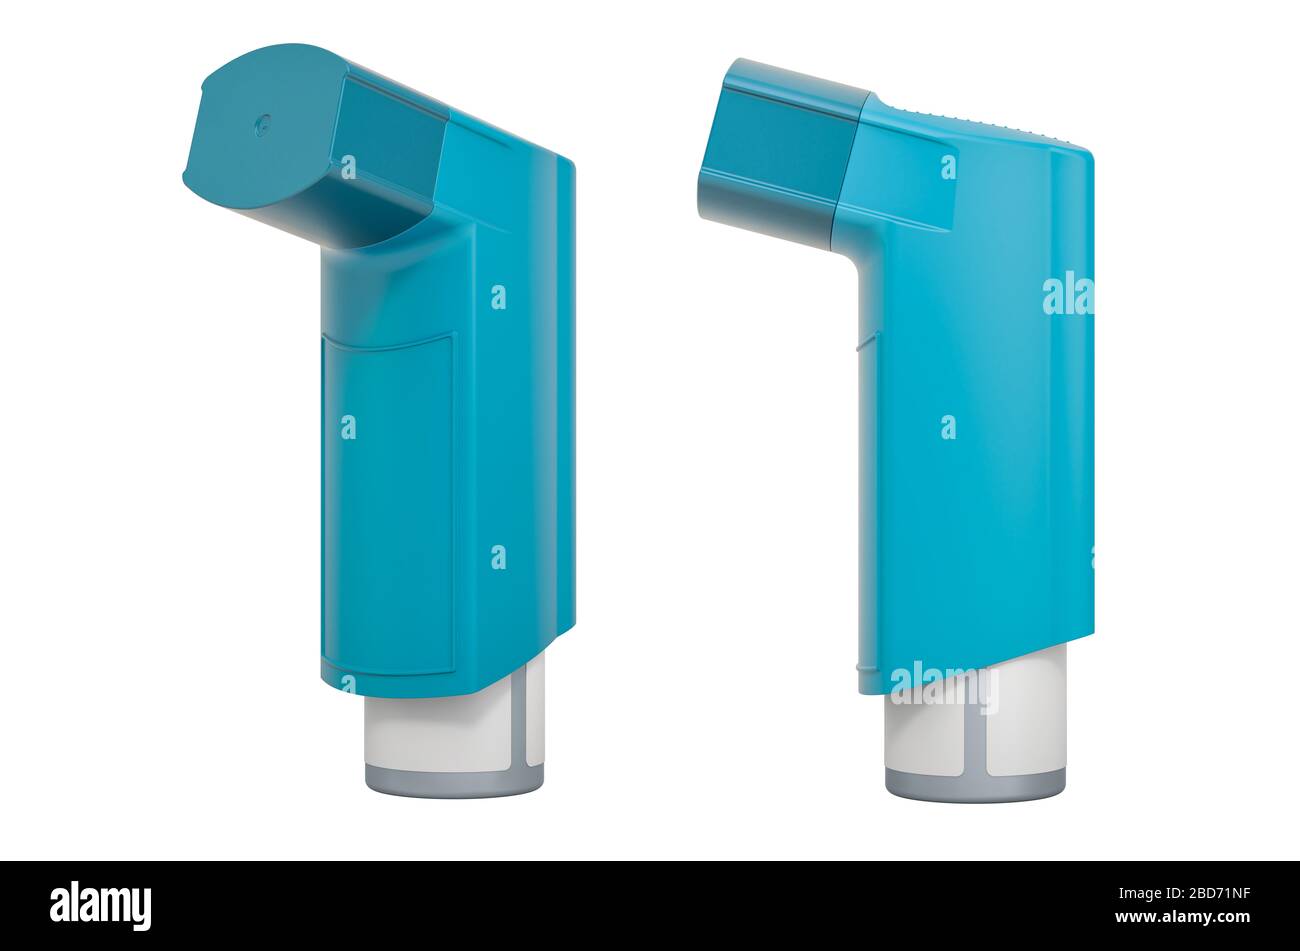 Metered-dose inhaler, MDI. 3D rendering isolated on white background Stock Photo